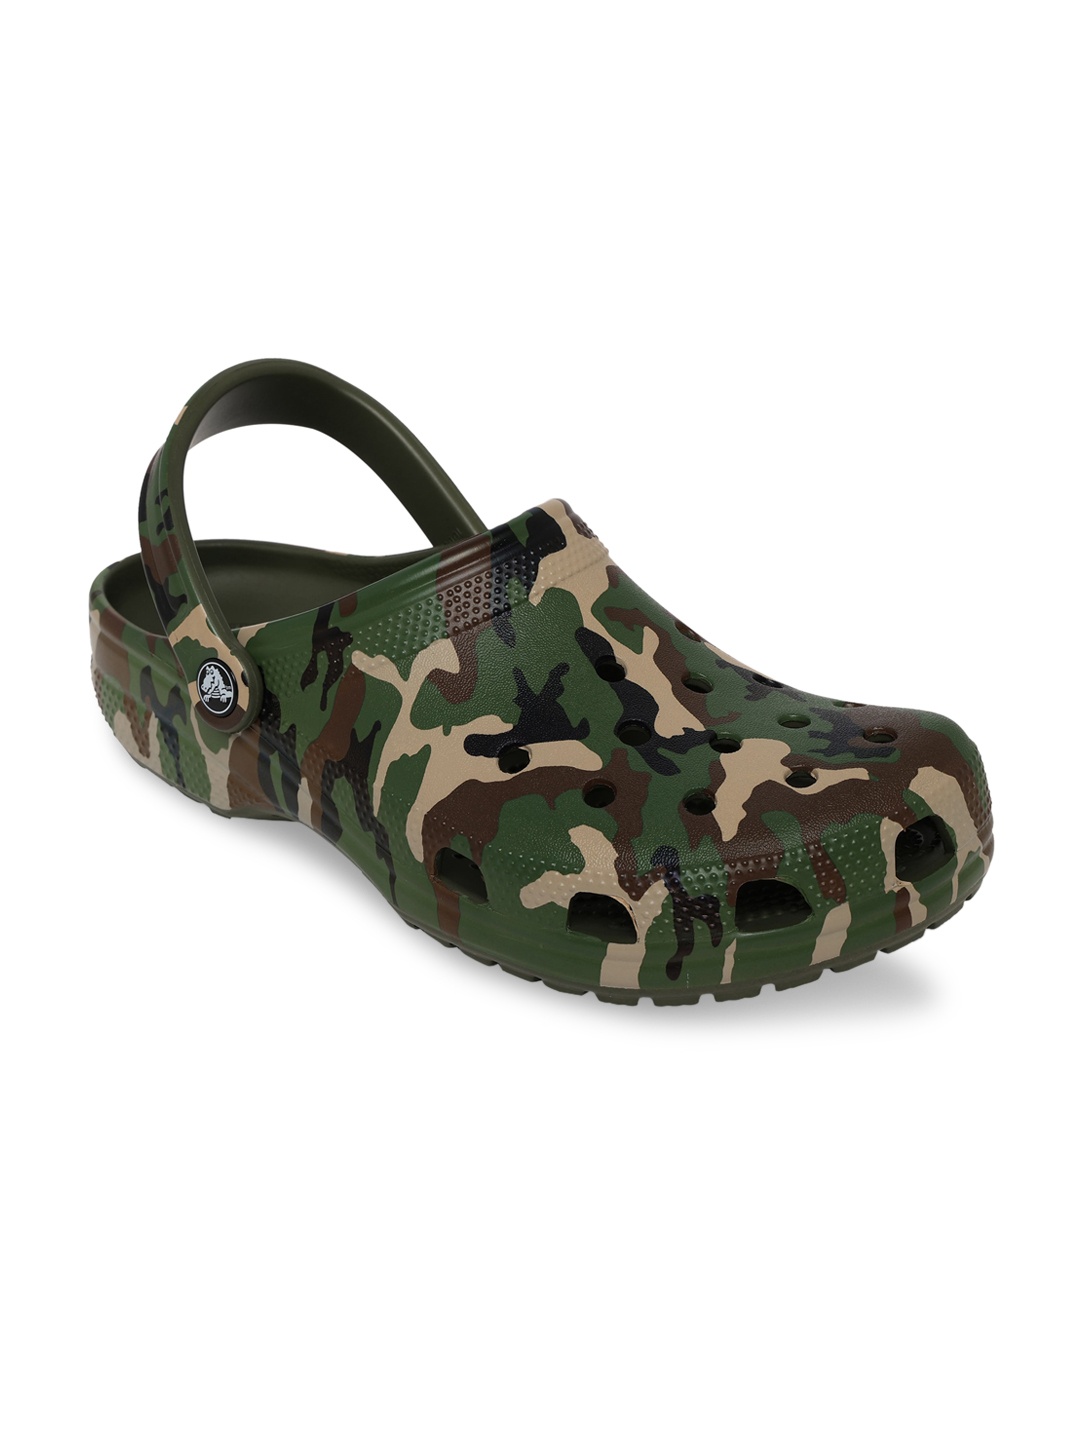 Crocs Classic Men Olive Green Black Clogs - buy at the price of $29.74 ...